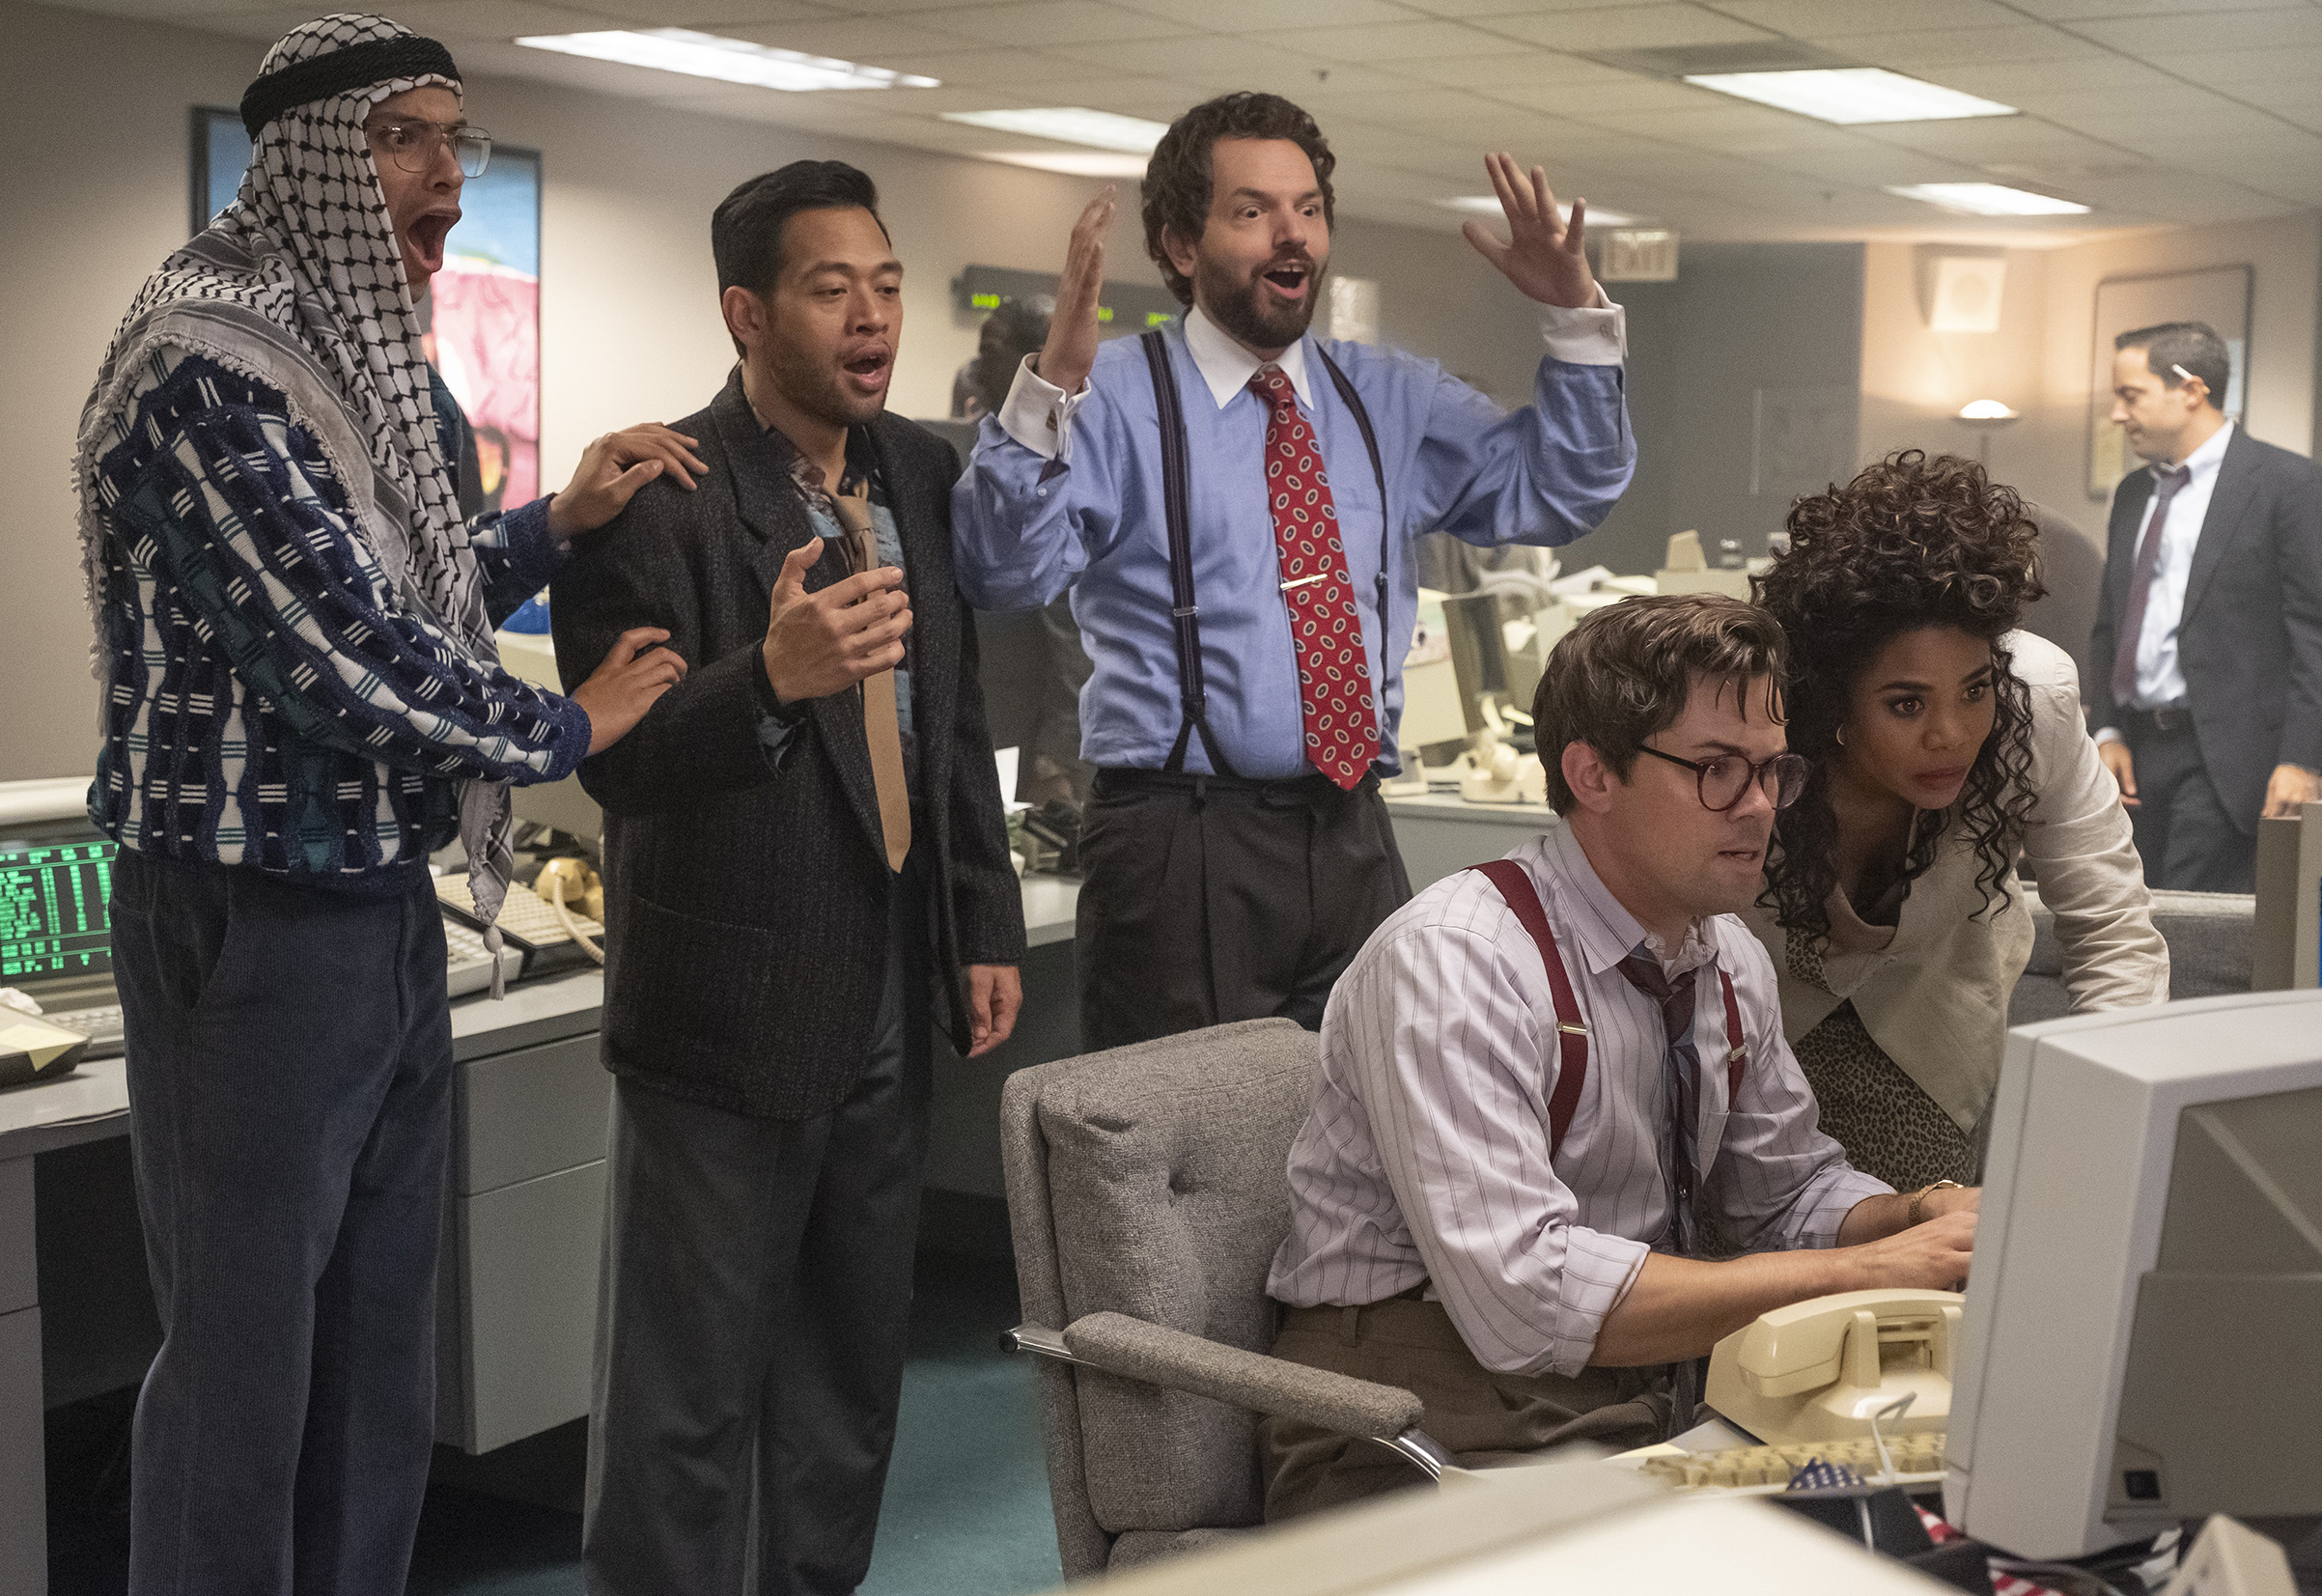 Black Monday leads a slate of new dark comedies convinced that greed isn't good (Showtime)